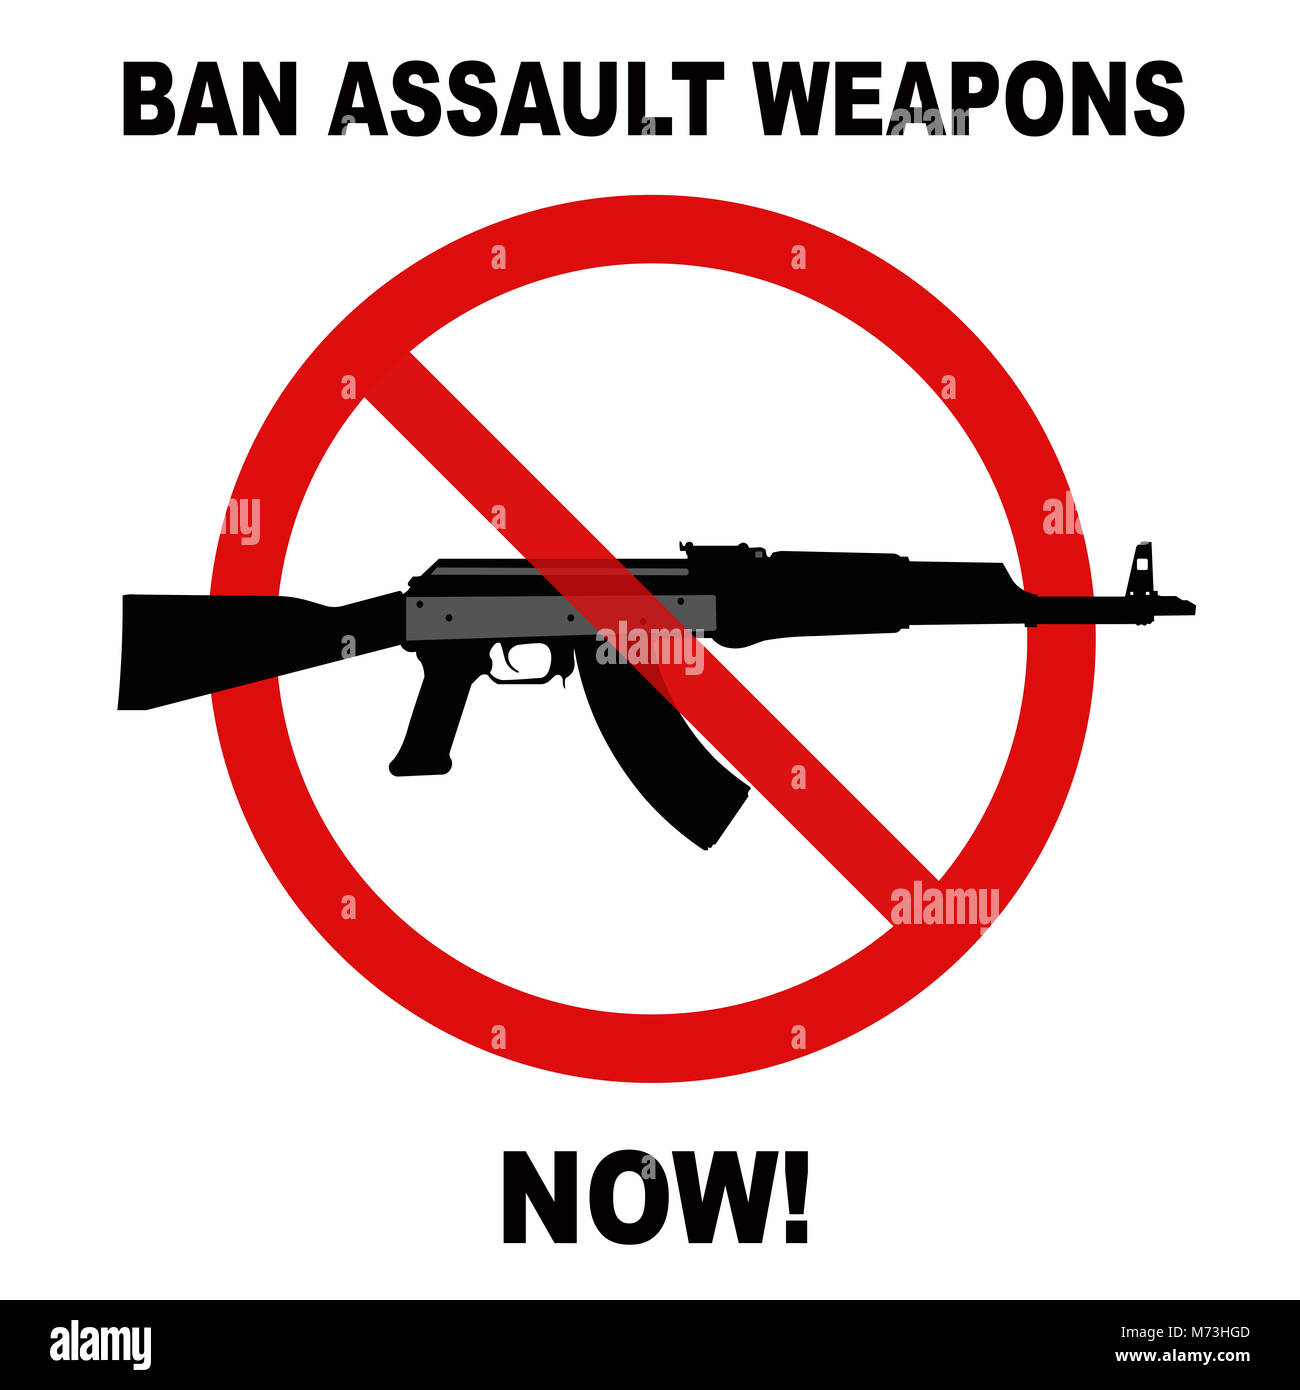 Image result for anti assault weapons